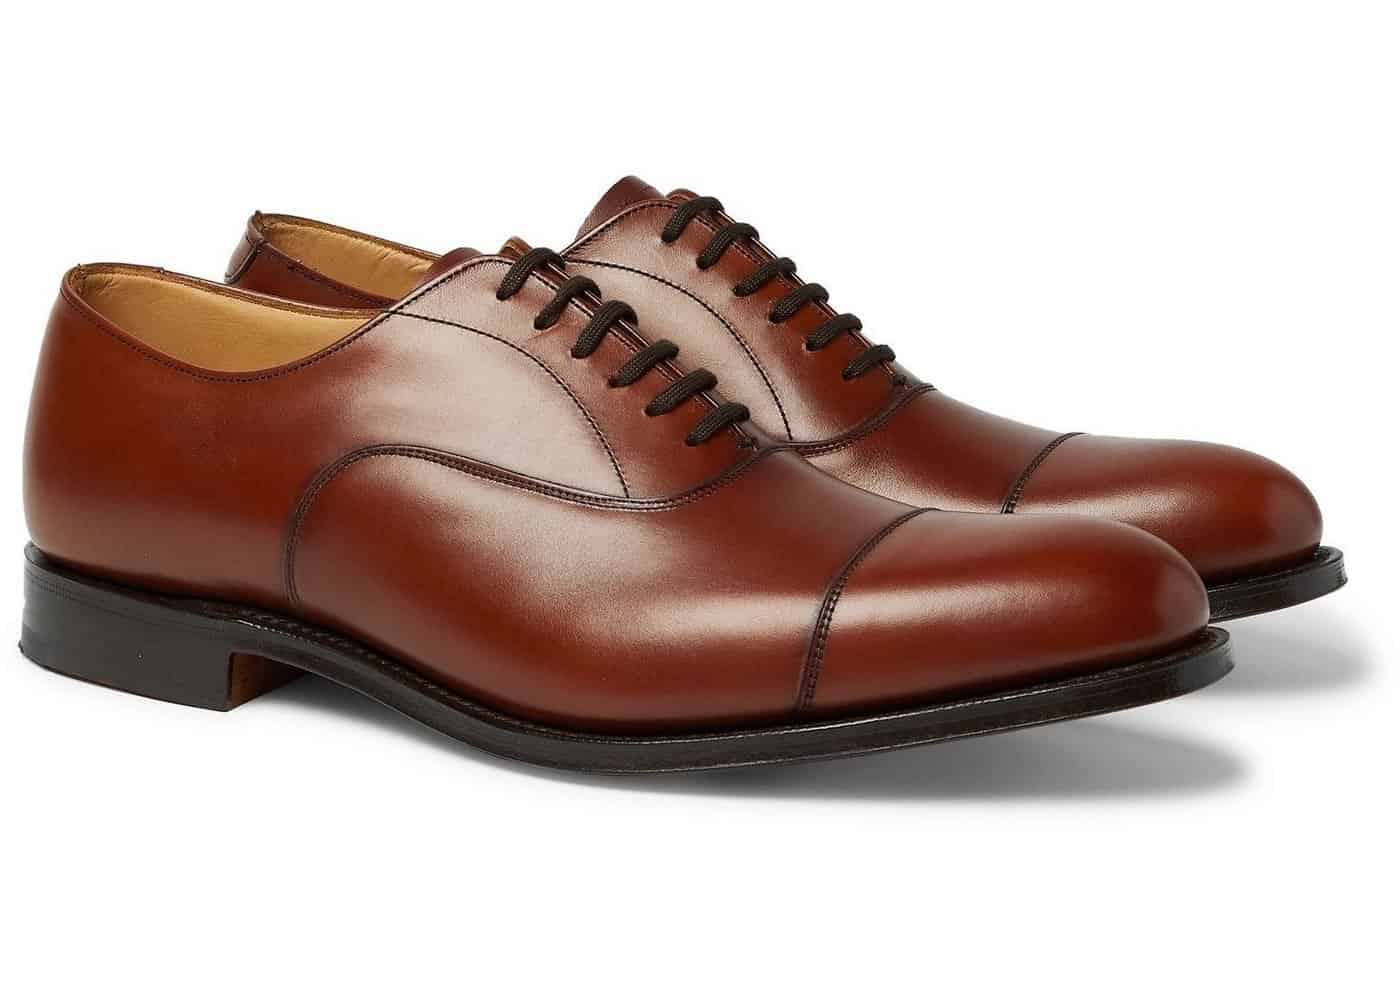 Best Oxford Shoes: 15 Men's Dress Shoes You Will Surely Love!